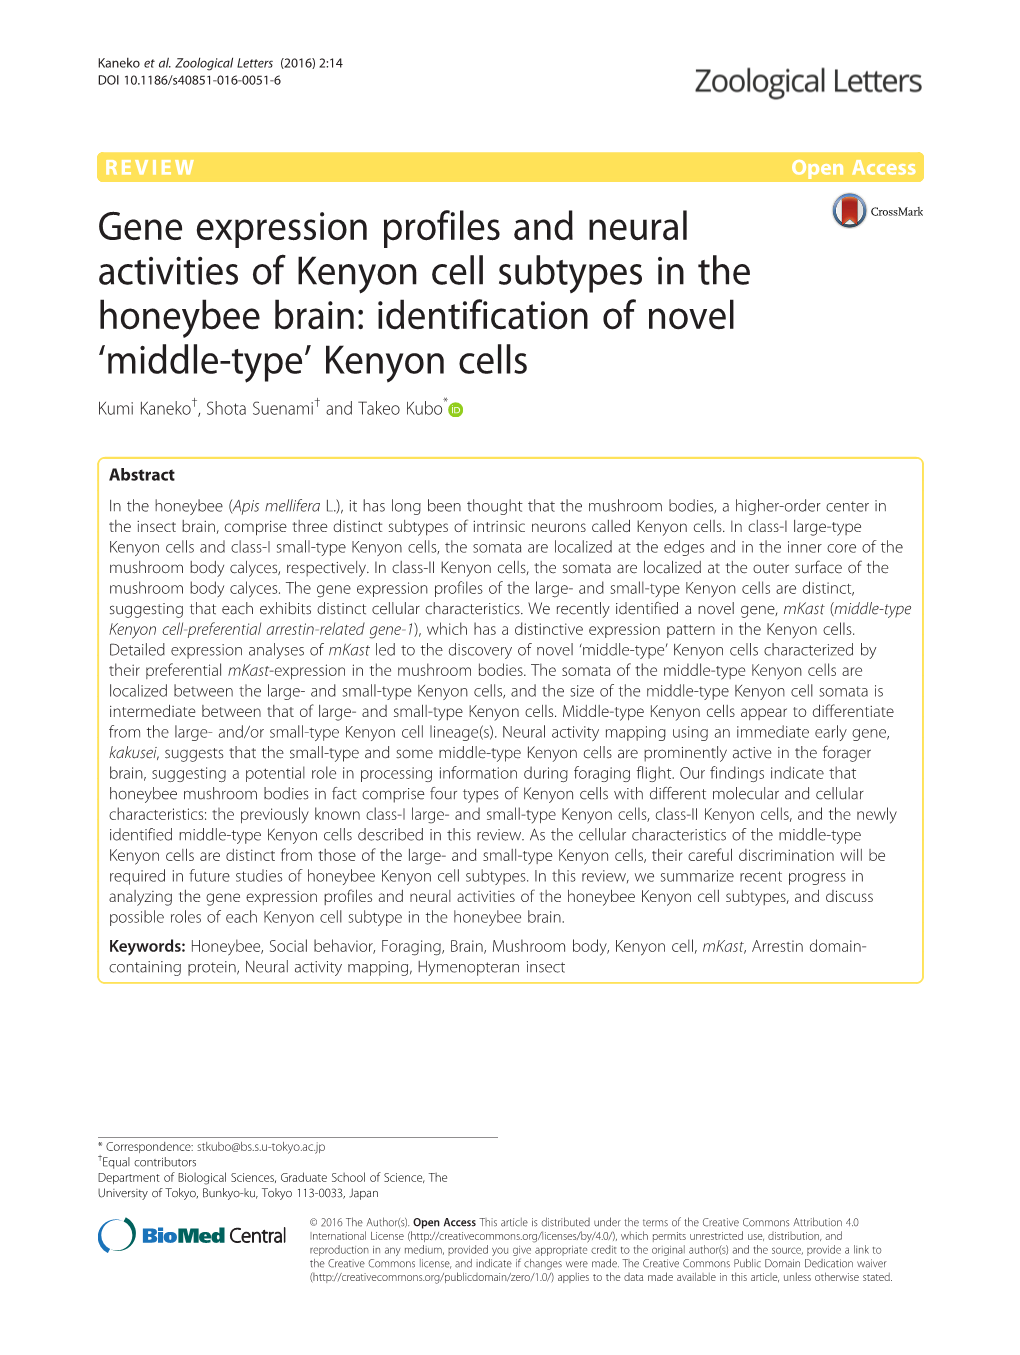 Gene Expression Profiles and Neural Activities of Kenyon Cell Subtypes In